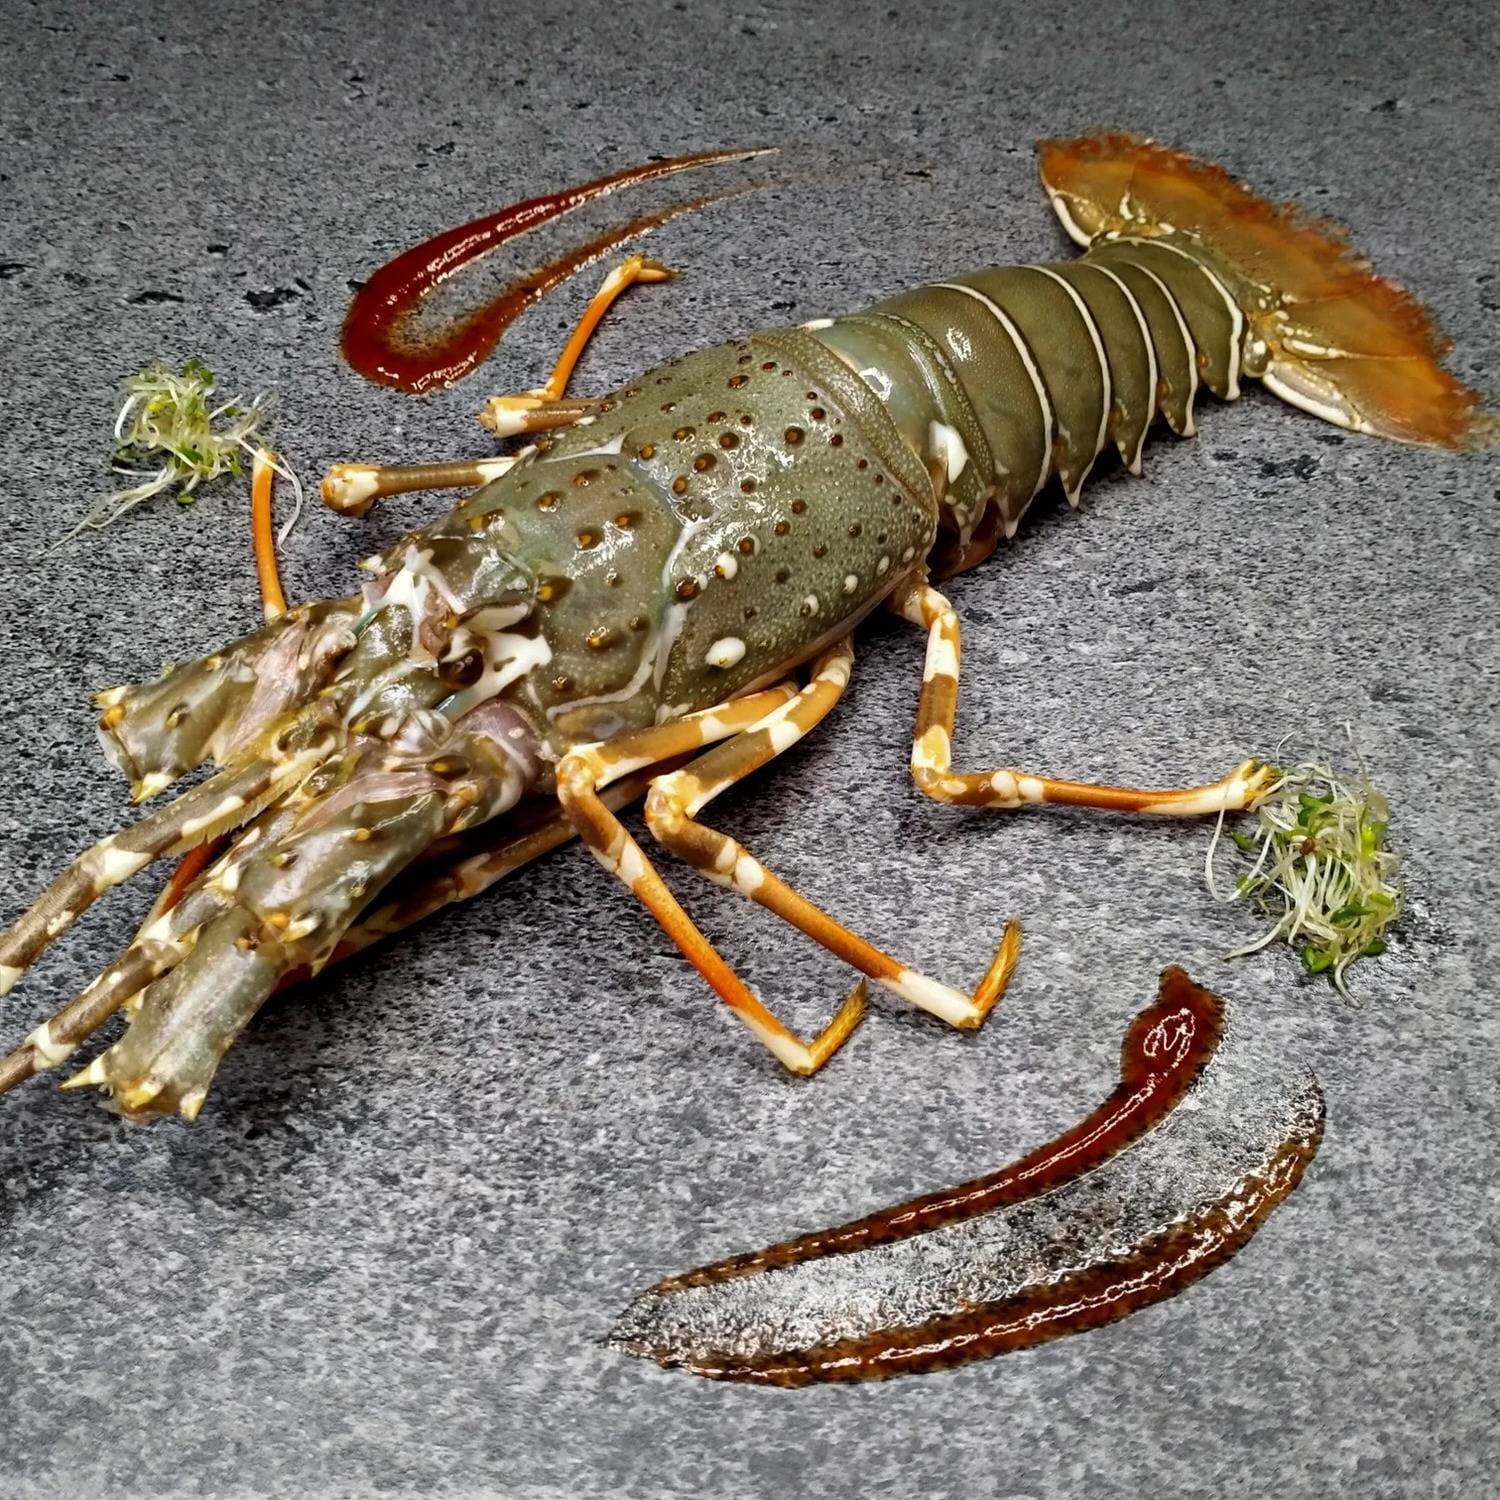 Lobster - Medium Size, Cleaned